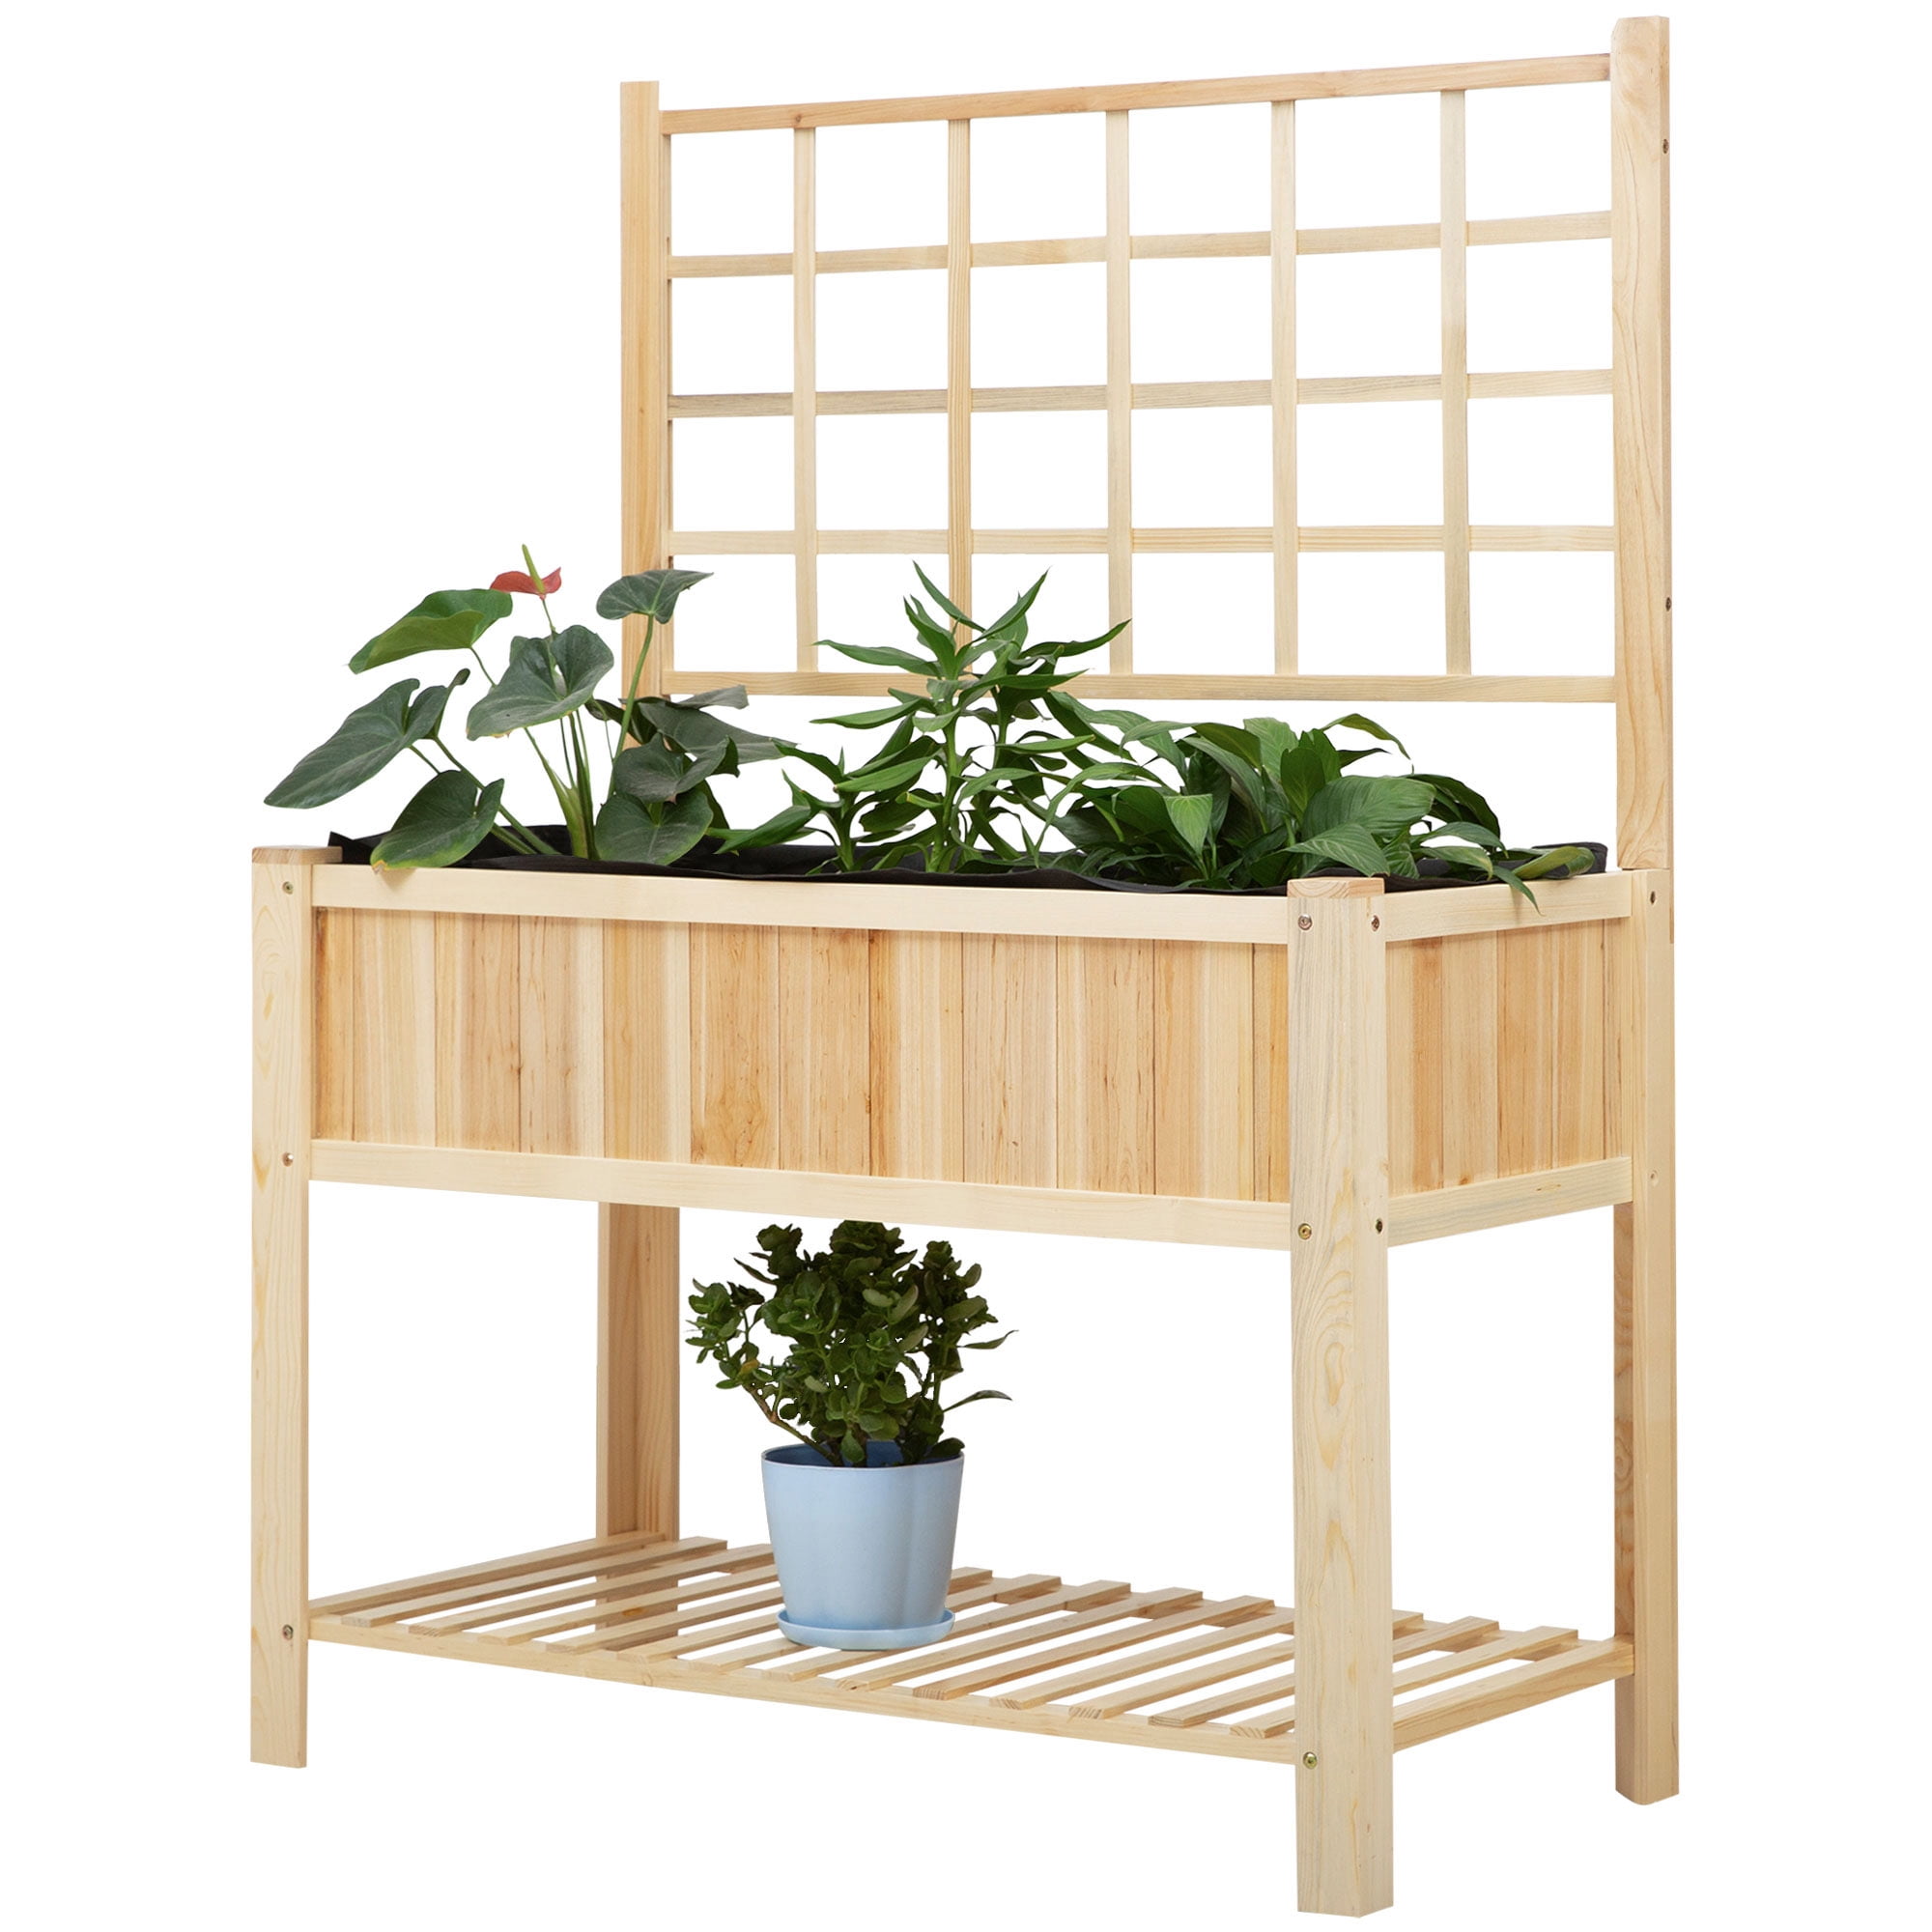 Outsunny Wooden Raised Garden Bed With Trellis Coutryside Style Elevated Planter Box Stand